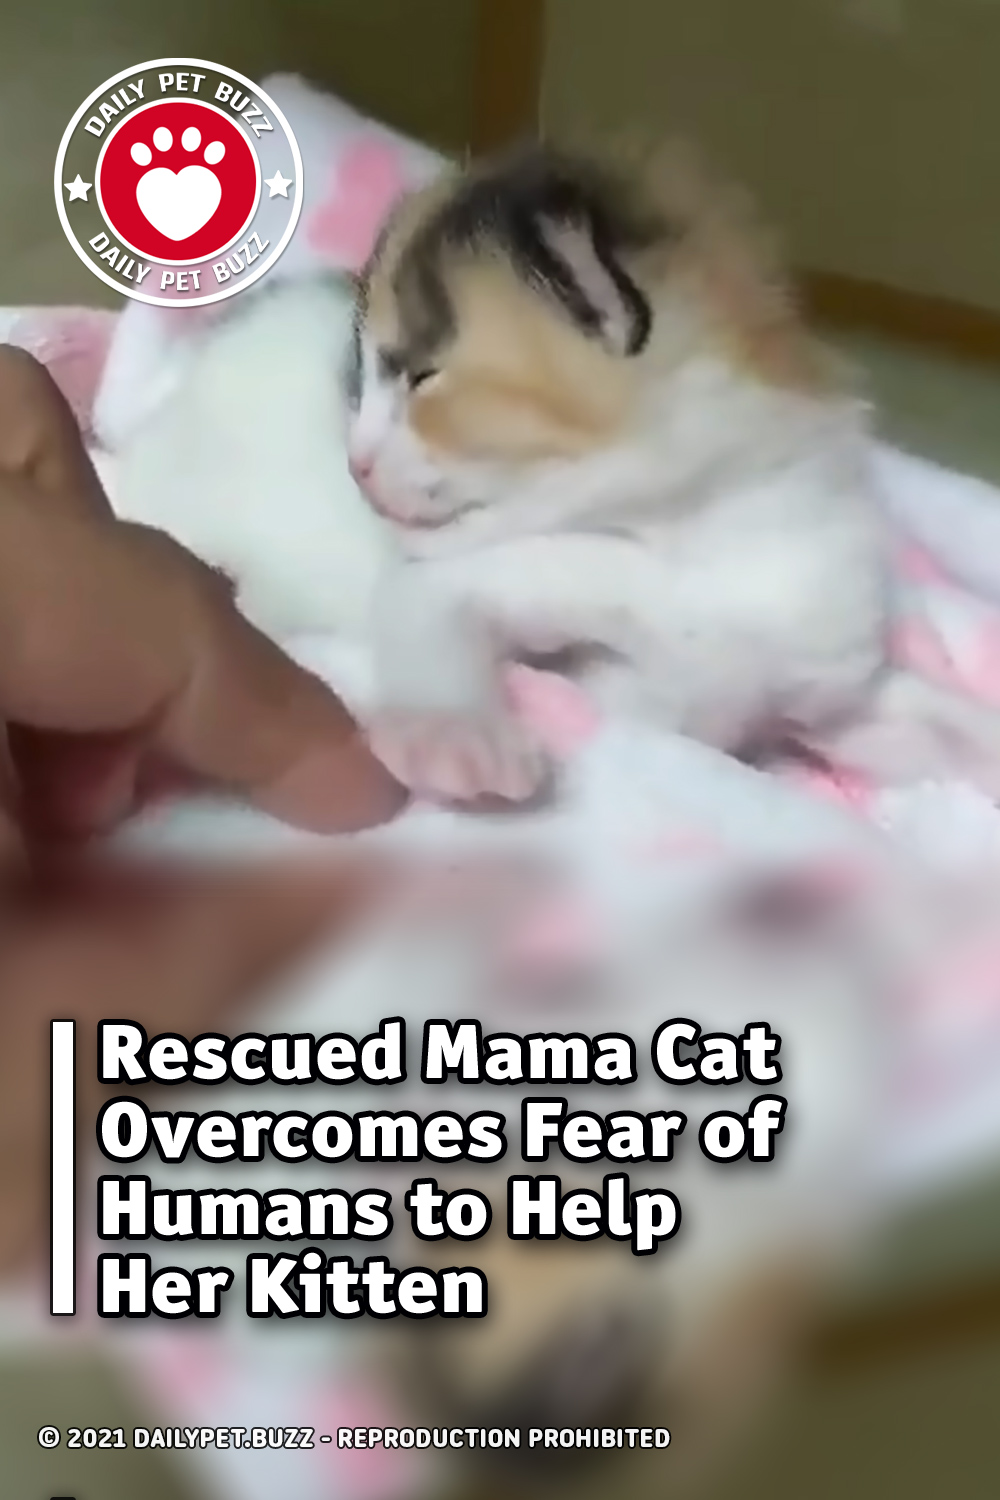 Rescued Mama Cat Overcomes Fear of Humans to Help Her Kitten